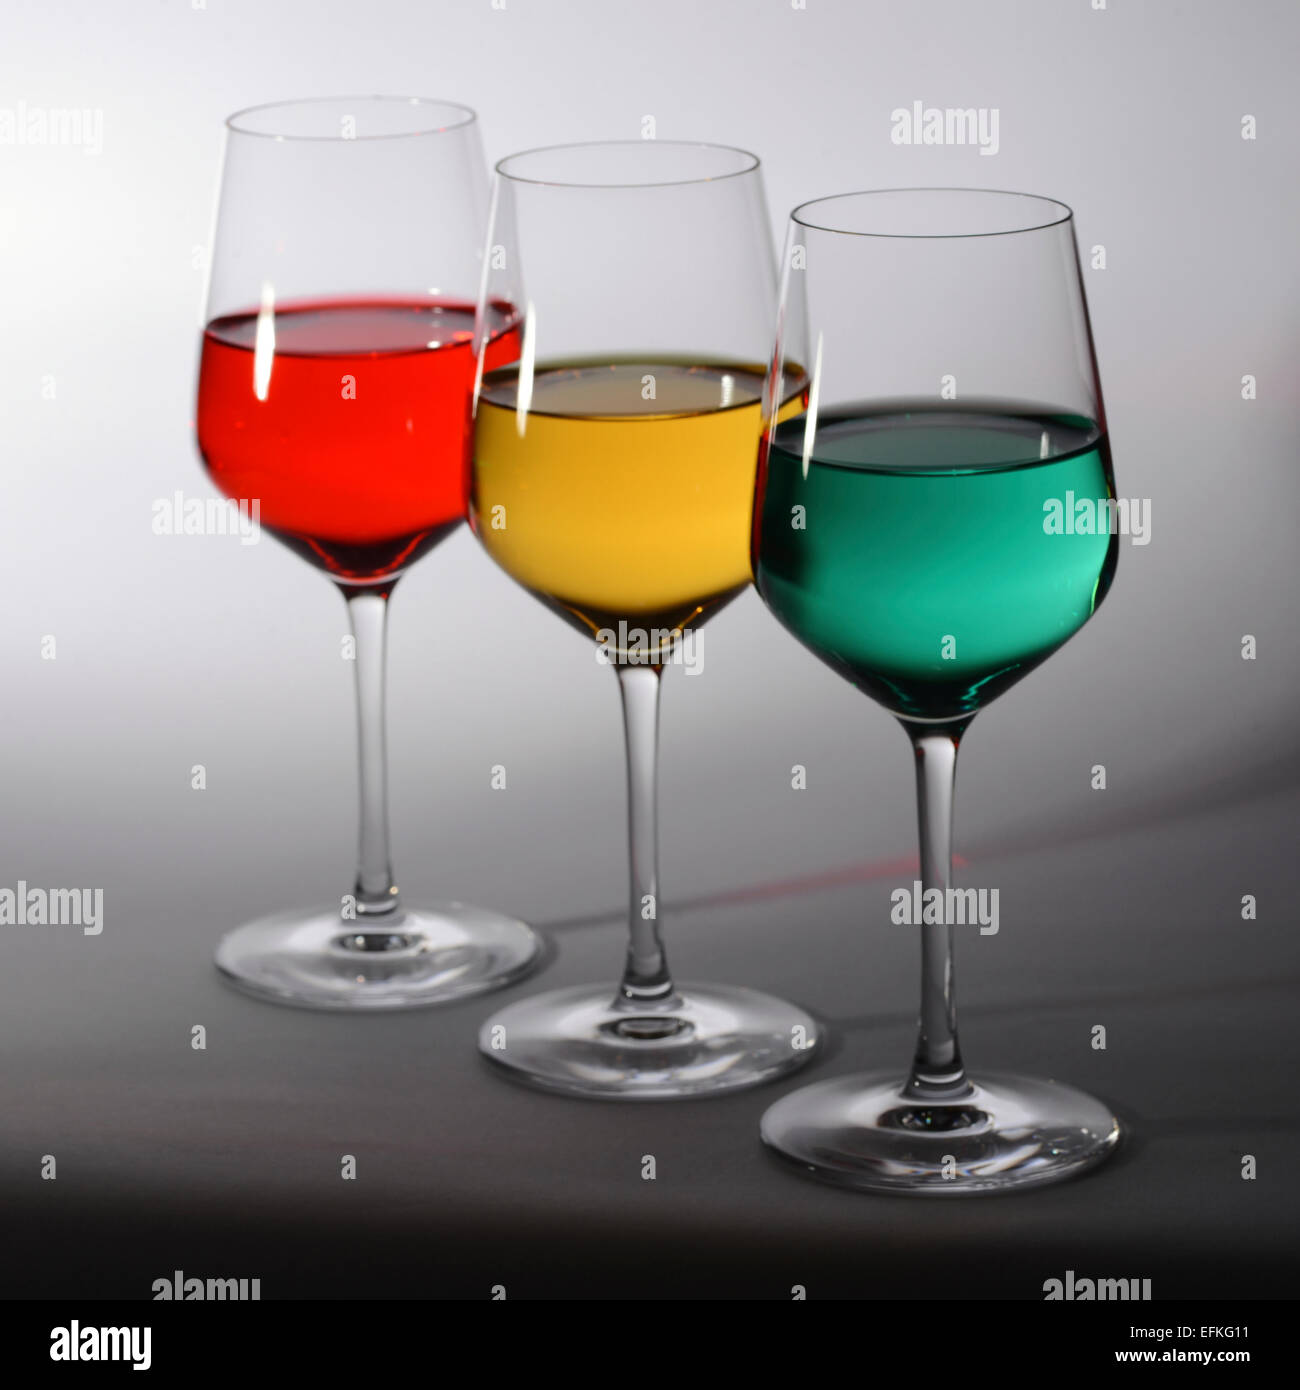 Download Three Wine Glasses Filled With Red Yellow And Green Colored Liquid Stock Photo Alamy Yellowimages Mockups